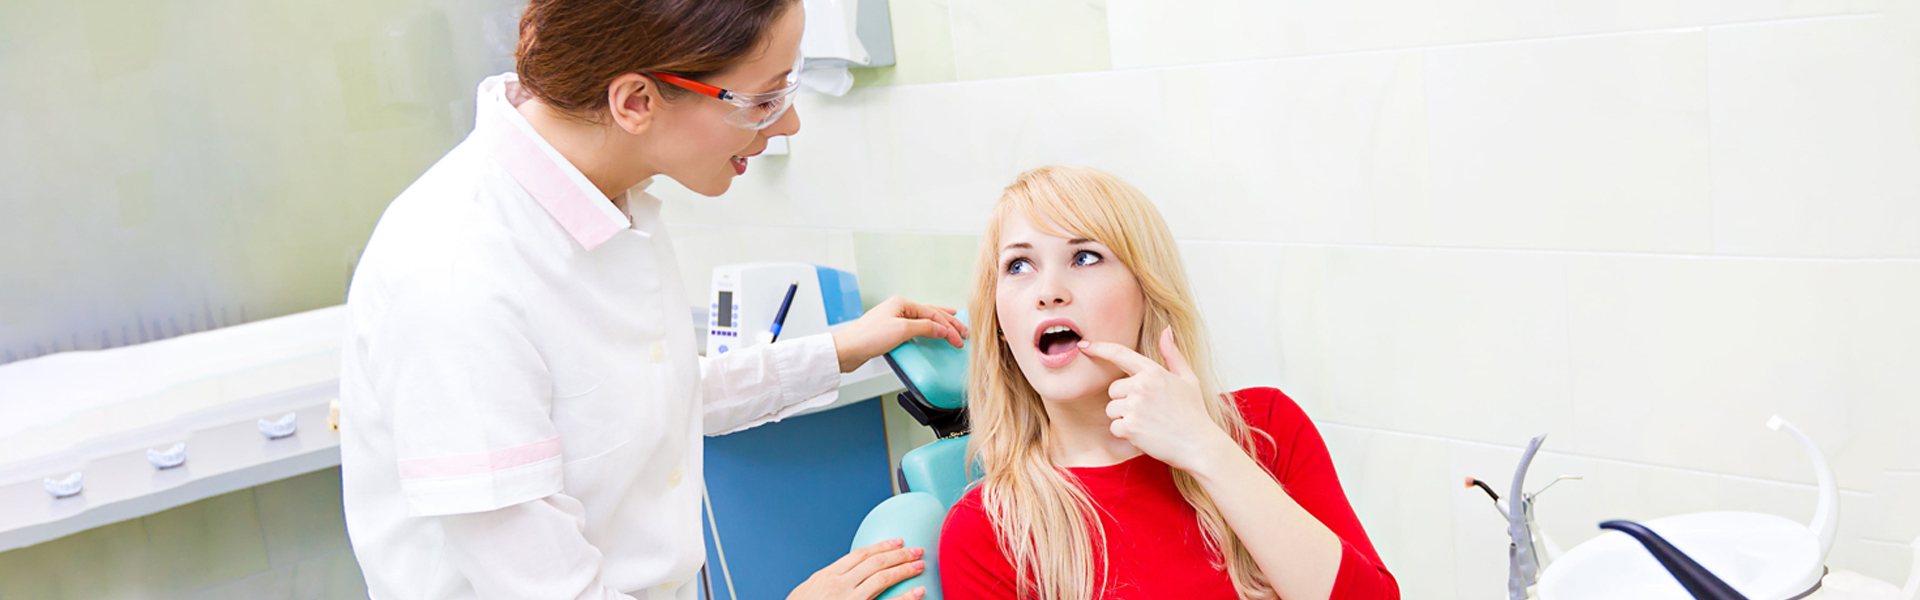 Reasons Why You Should Treat a Dental Emergency Quickly